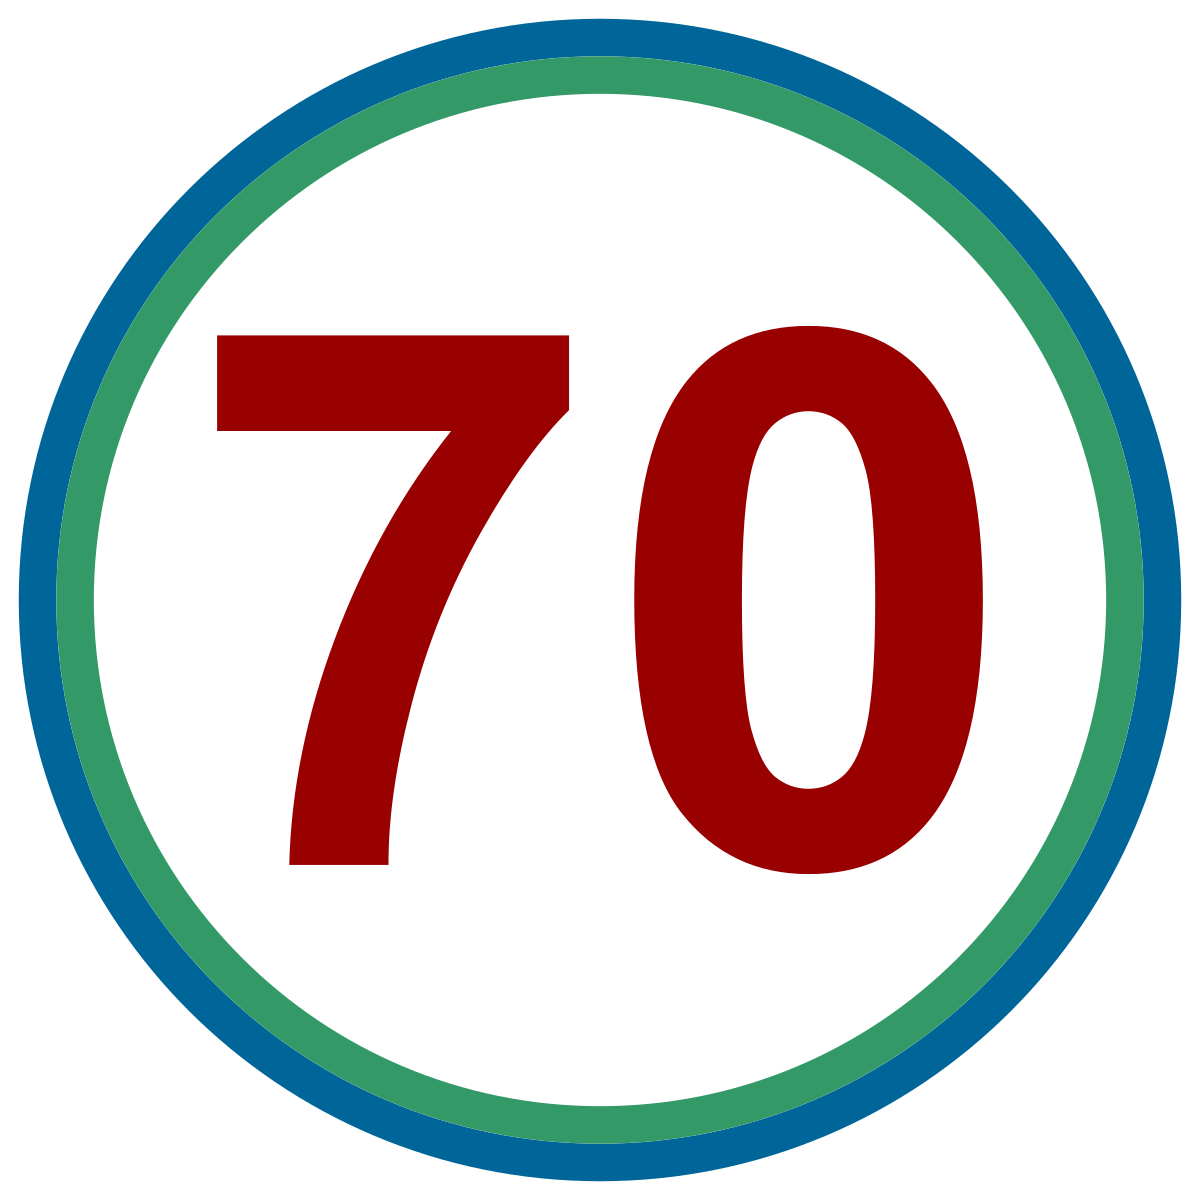 Category:70 (number) - Wikimedia Commons